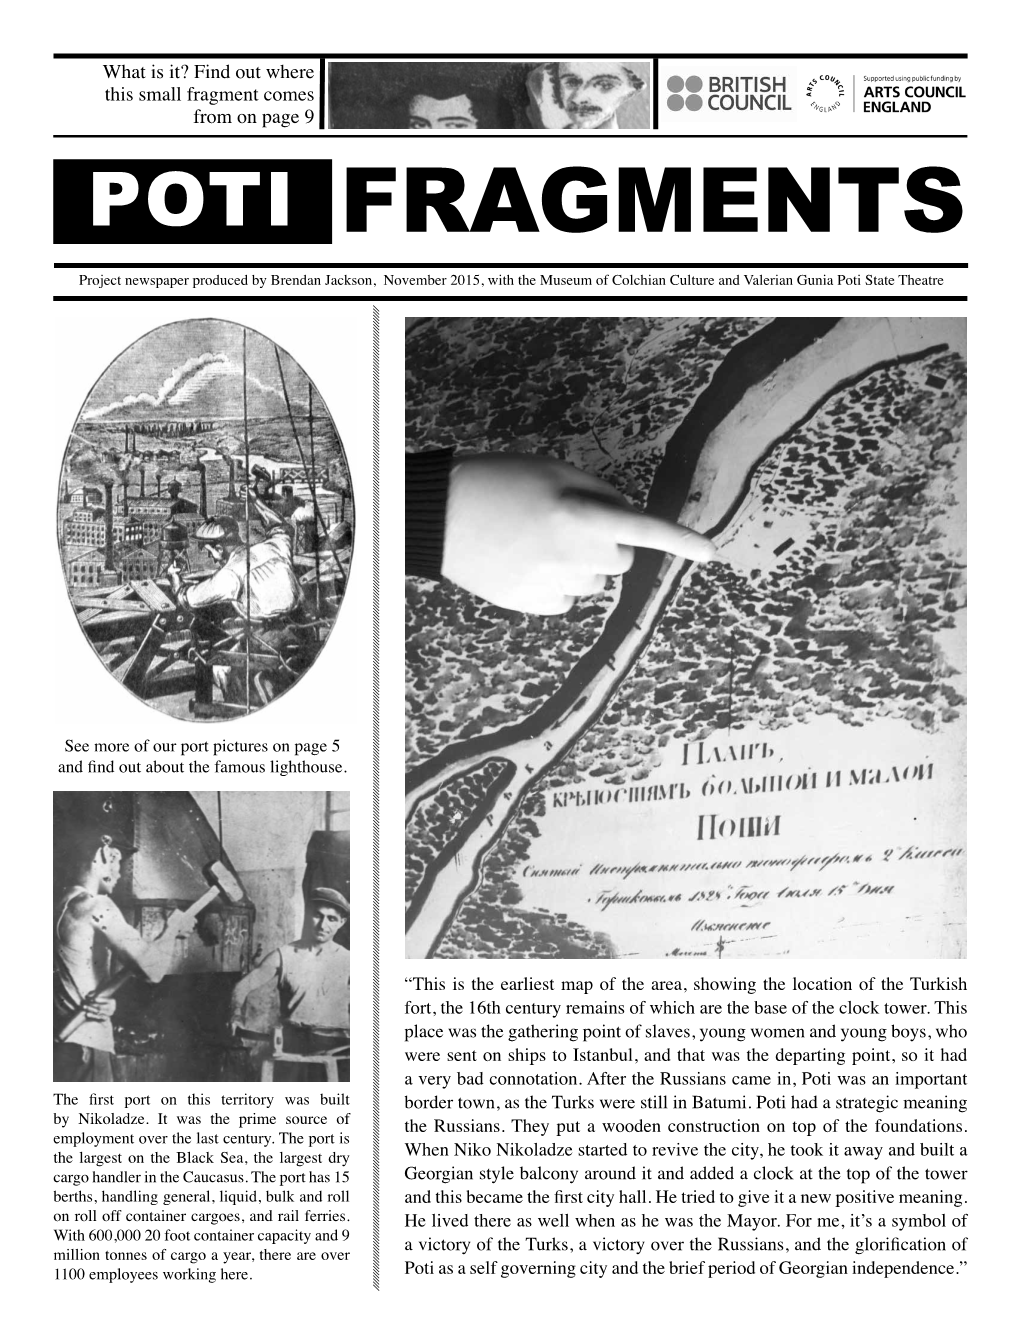 What Is It? Find out Where This Small Fragment Comes from on Page 9 POTI FRAGMENTS